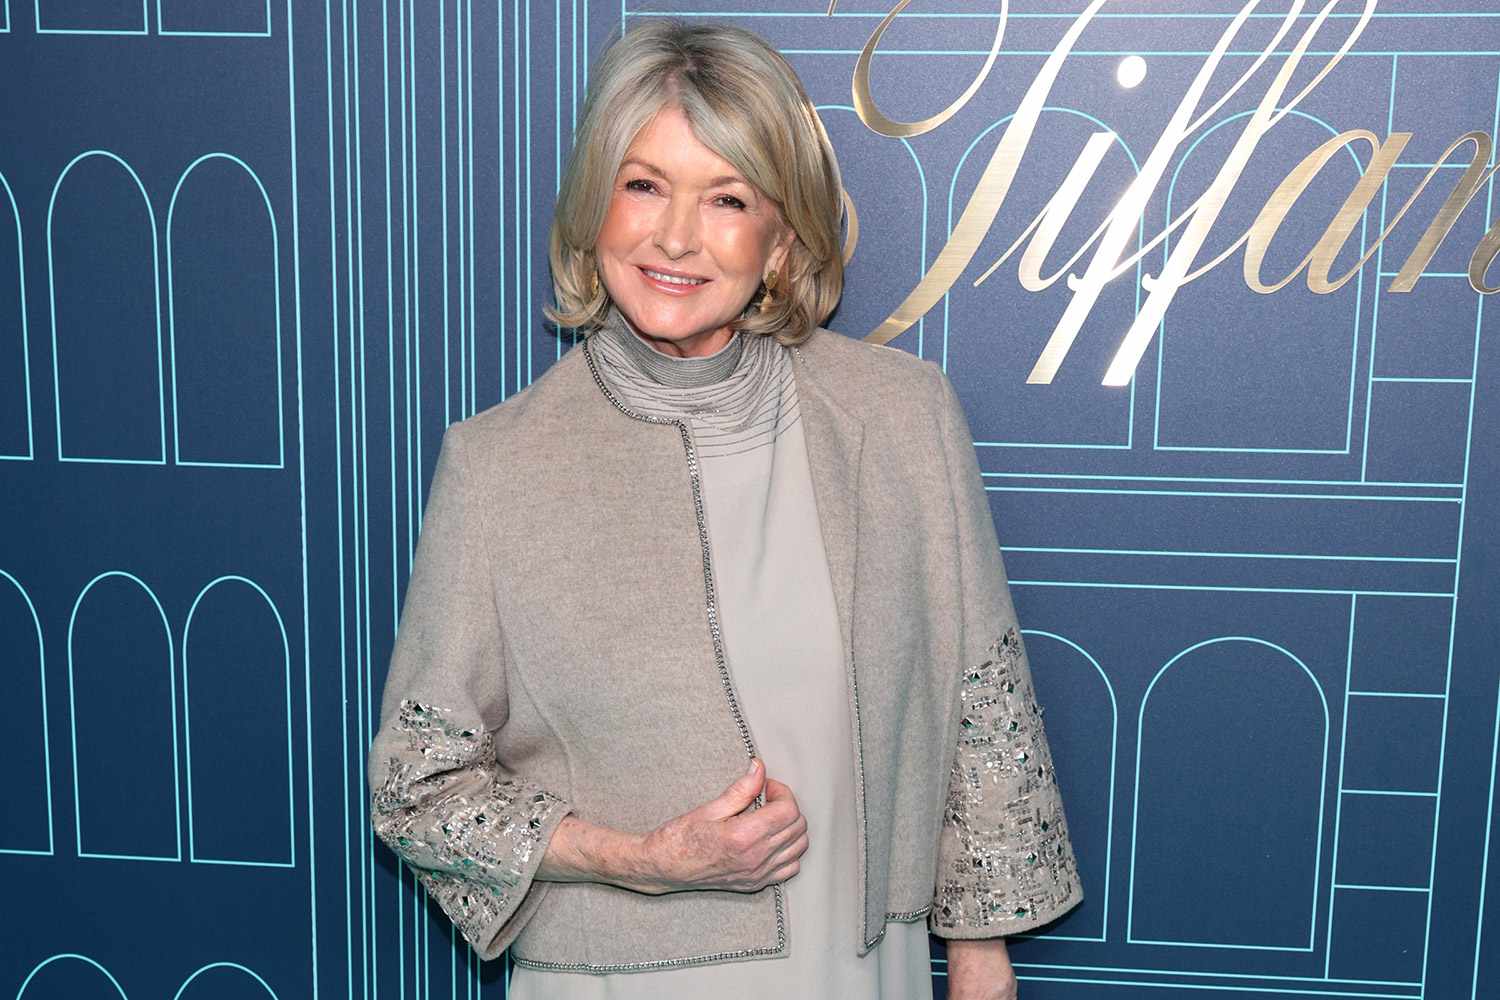 Martha Stewart Reveals Her Upcoming Mother's Day Plans with Her 'Lovely' Grandkids (Exclusive)